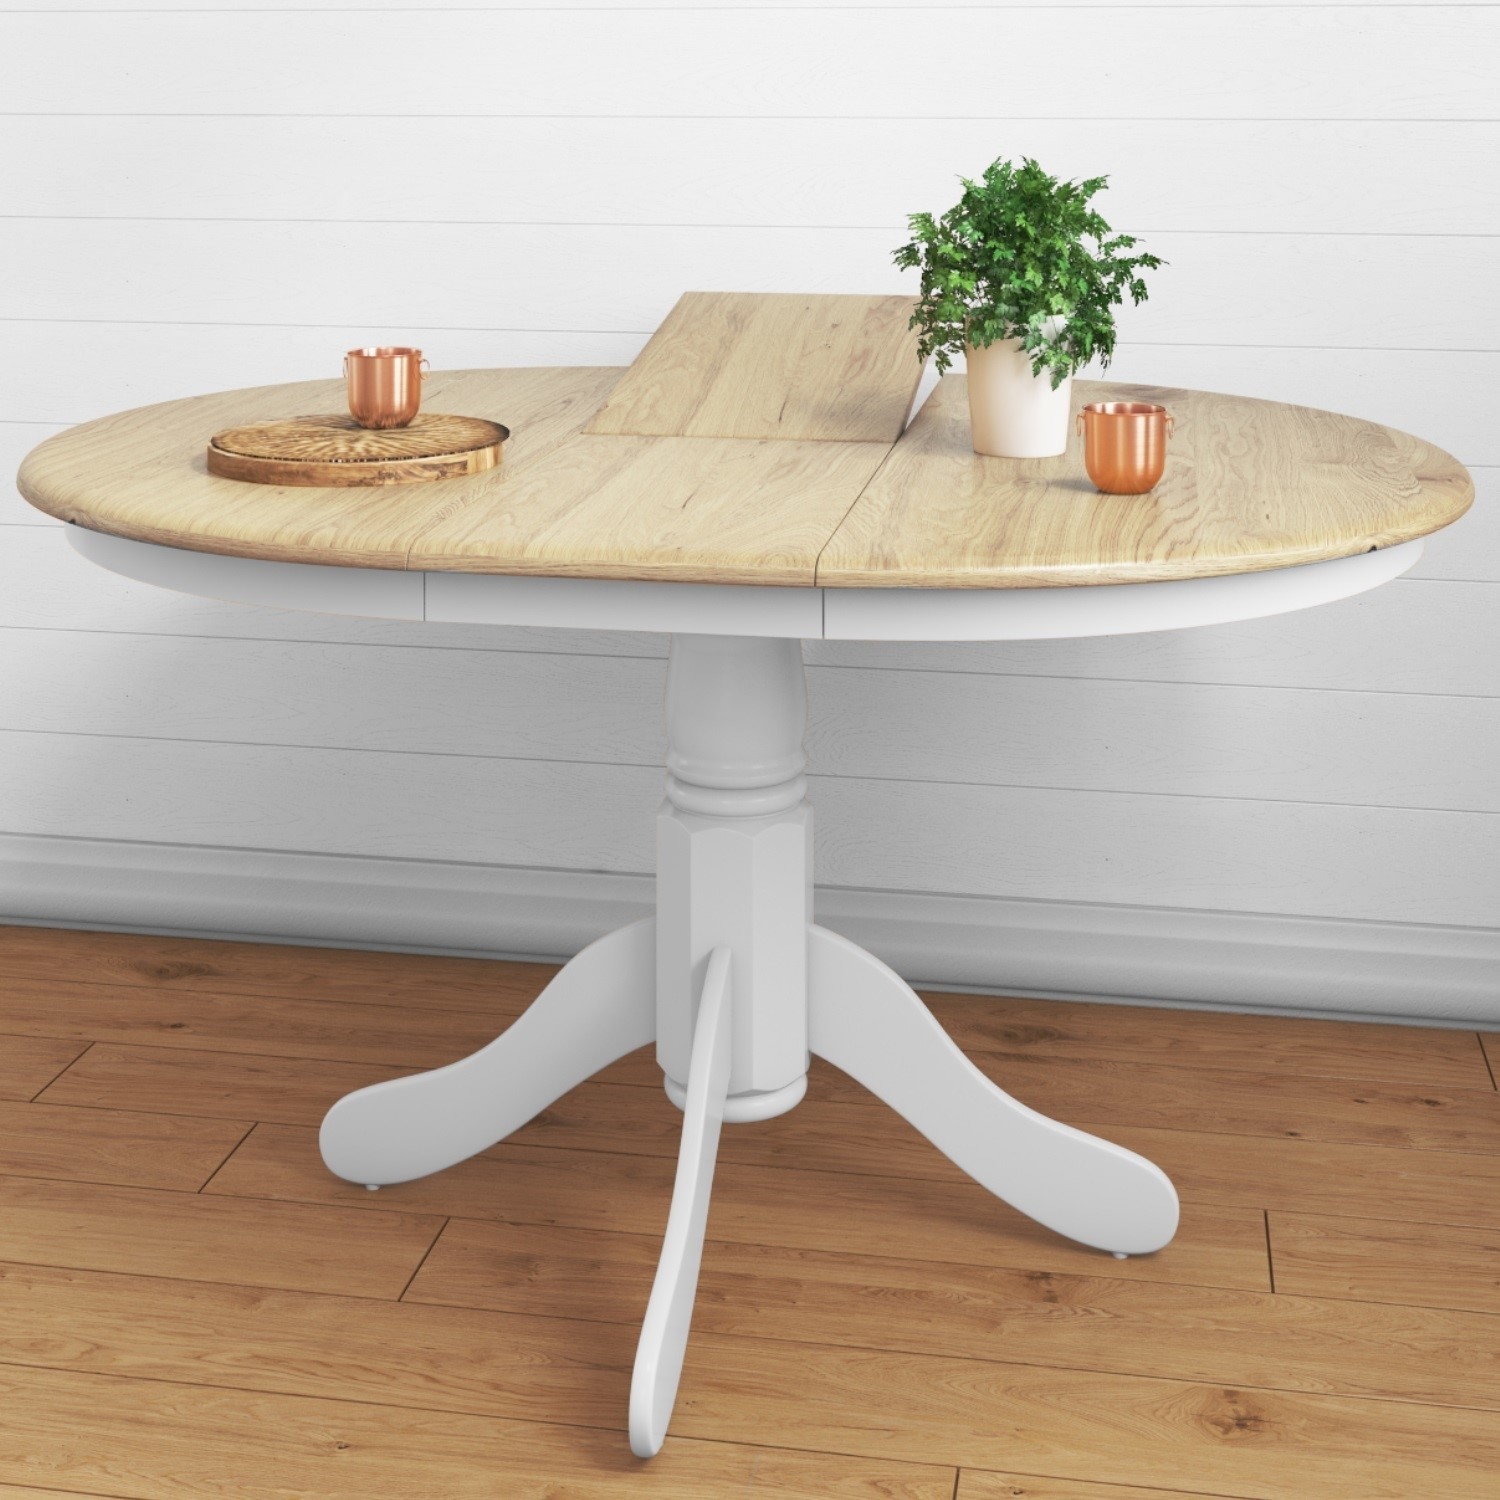 Extendable Round Wooden Dining Table in White/Natural 6 Seater 5056096018967 eBay